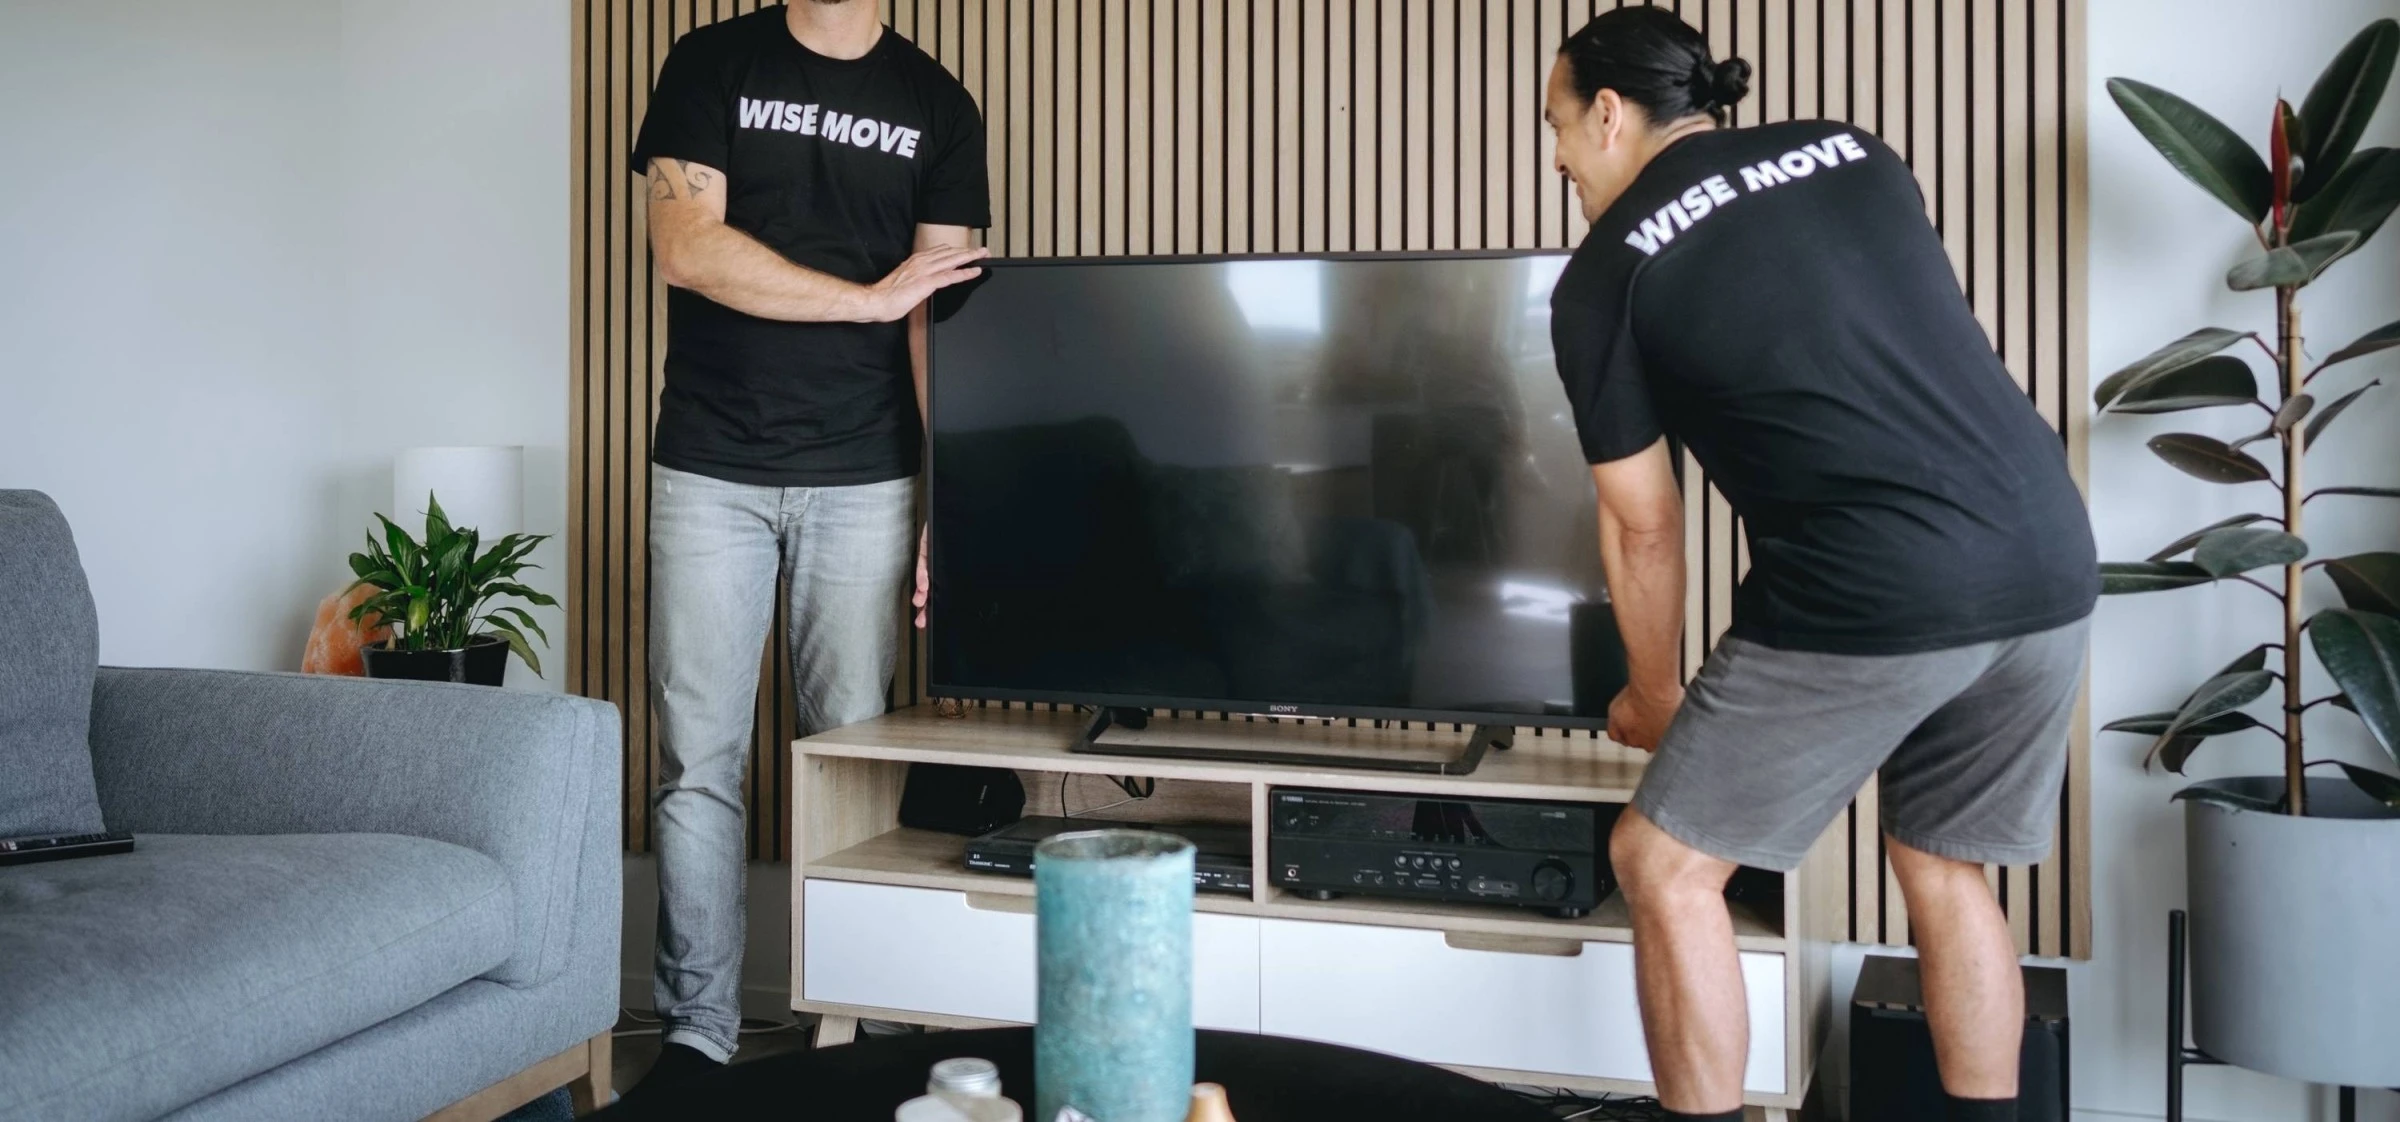 How to Safely Move Your Flat-Screen TV: A Simple Guide